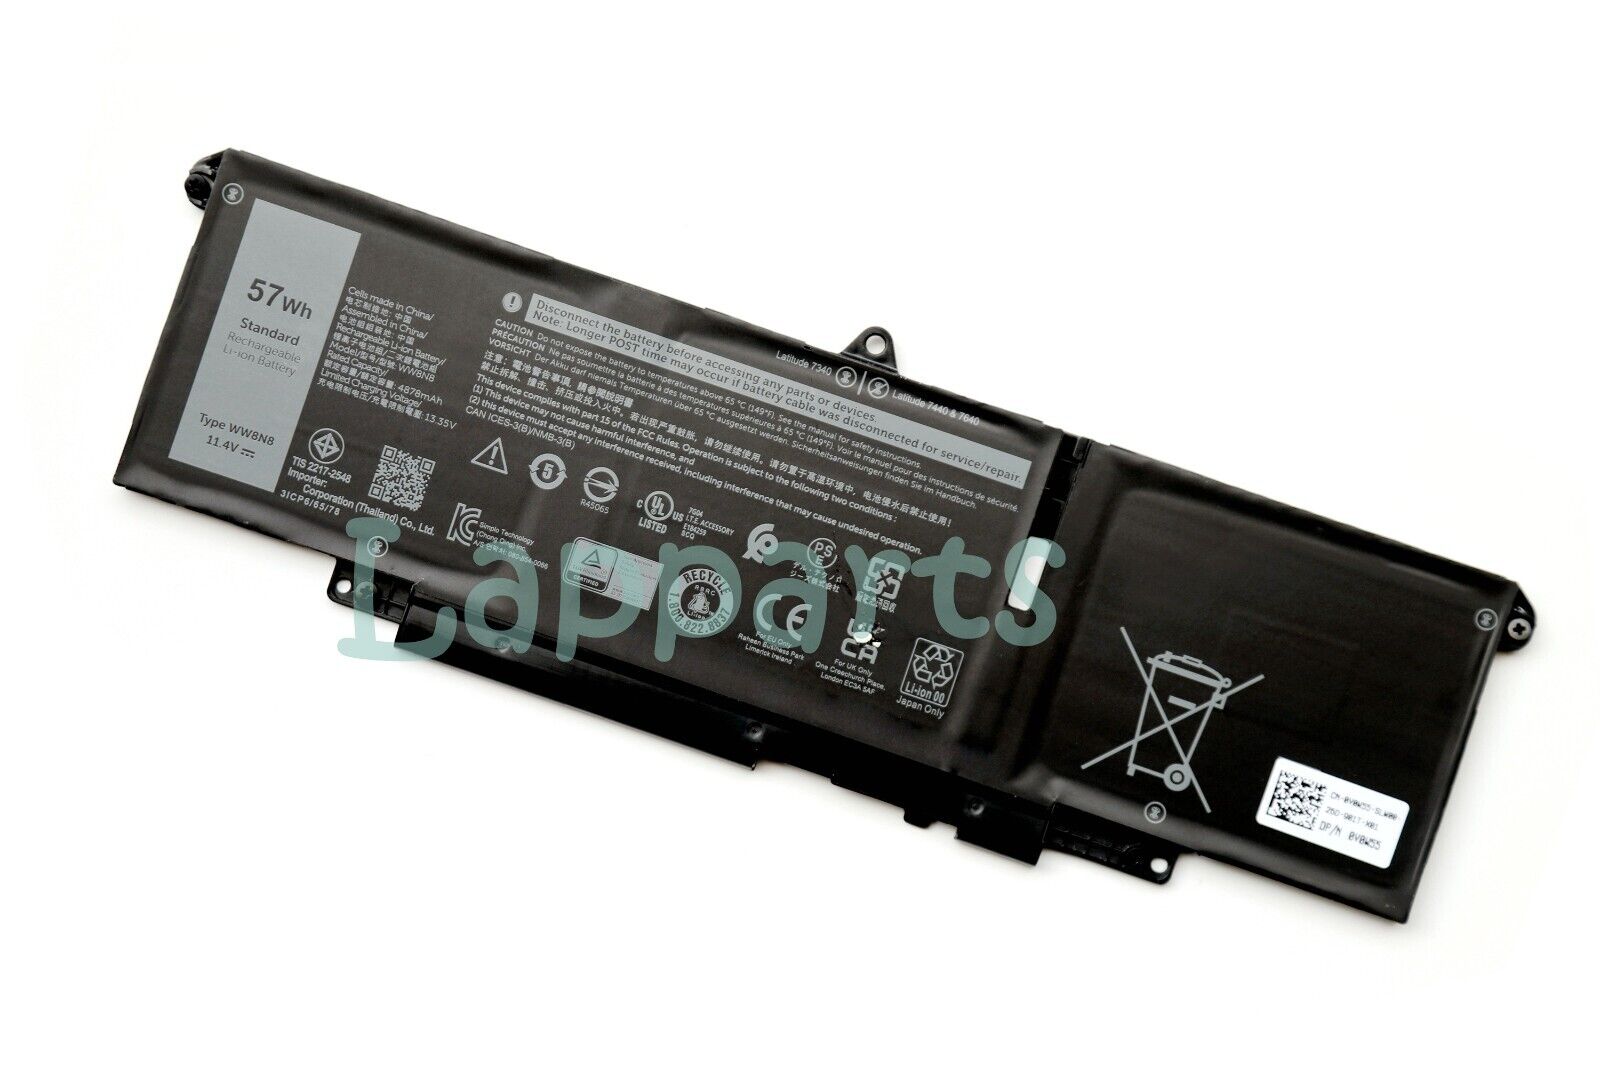 New WW8N8 57Wh Battery For Latitude 7340 7440 7640 Series Notebook 047T0